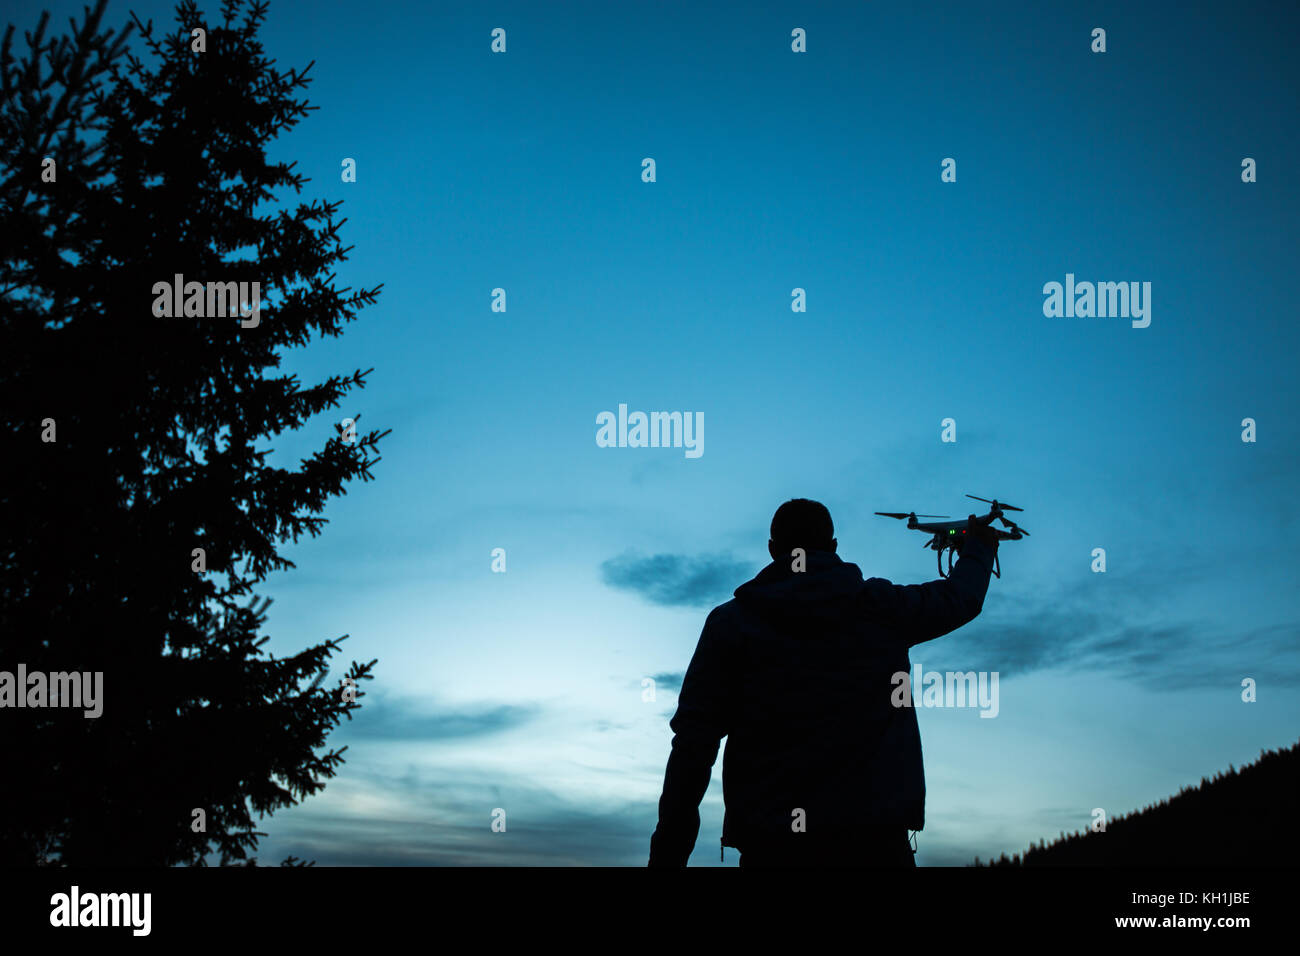 Man holding a drone for aerial photography. Silhouette against the sunset sky Stock Photo